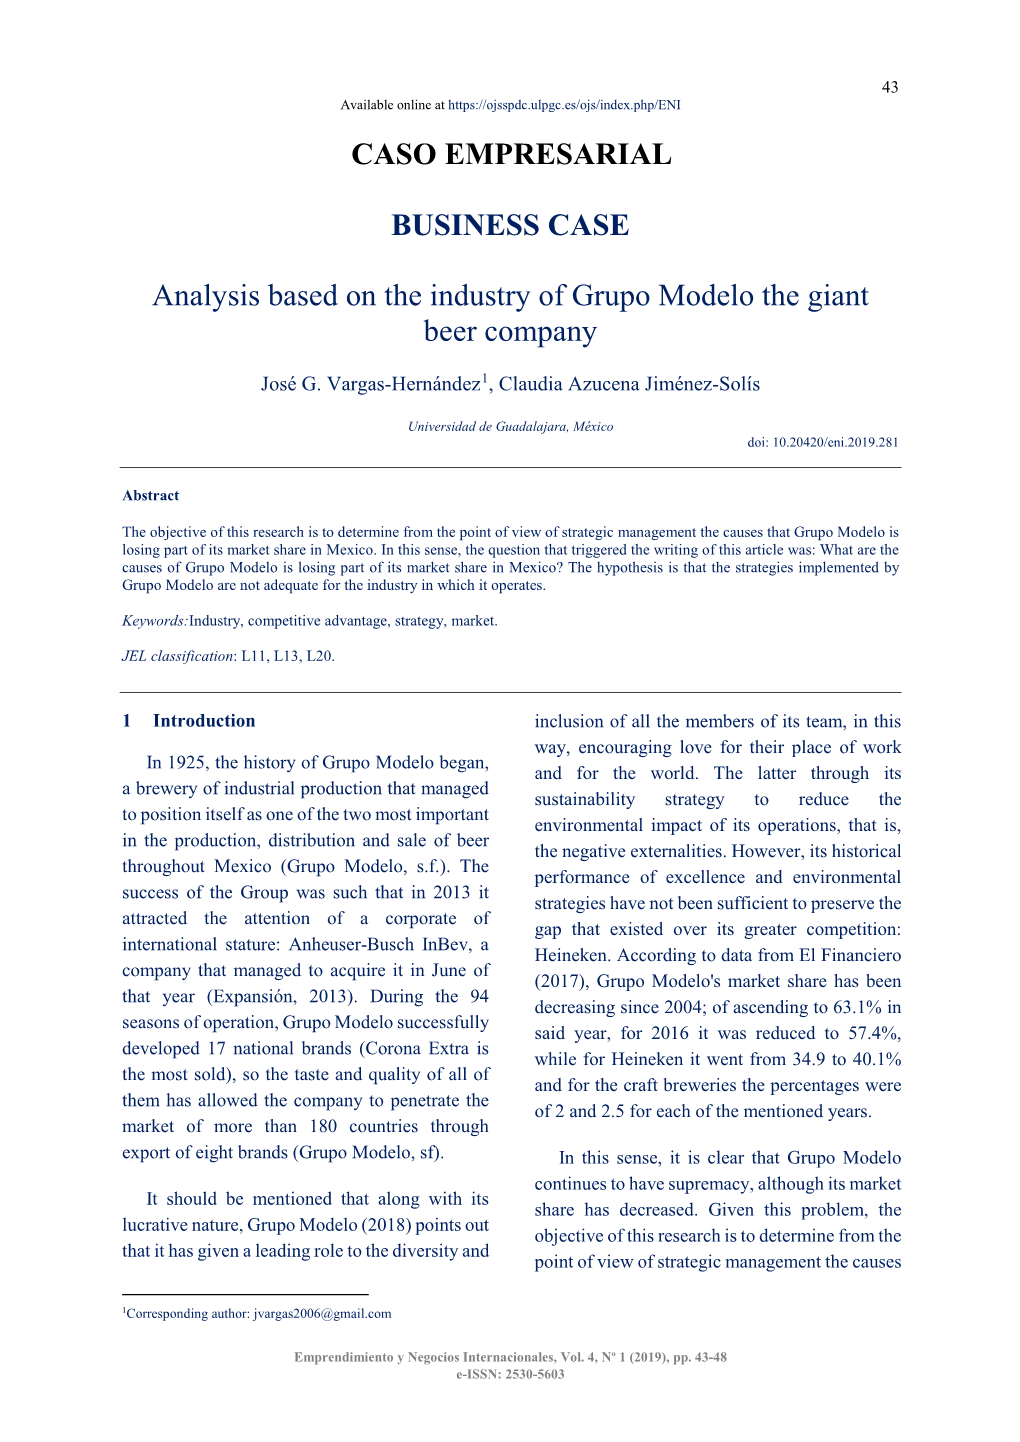 CASO EMPRESARIAL BUSINESS CASE Analysis Based on the Industry of Grupo Modelo the Giant Beer Company